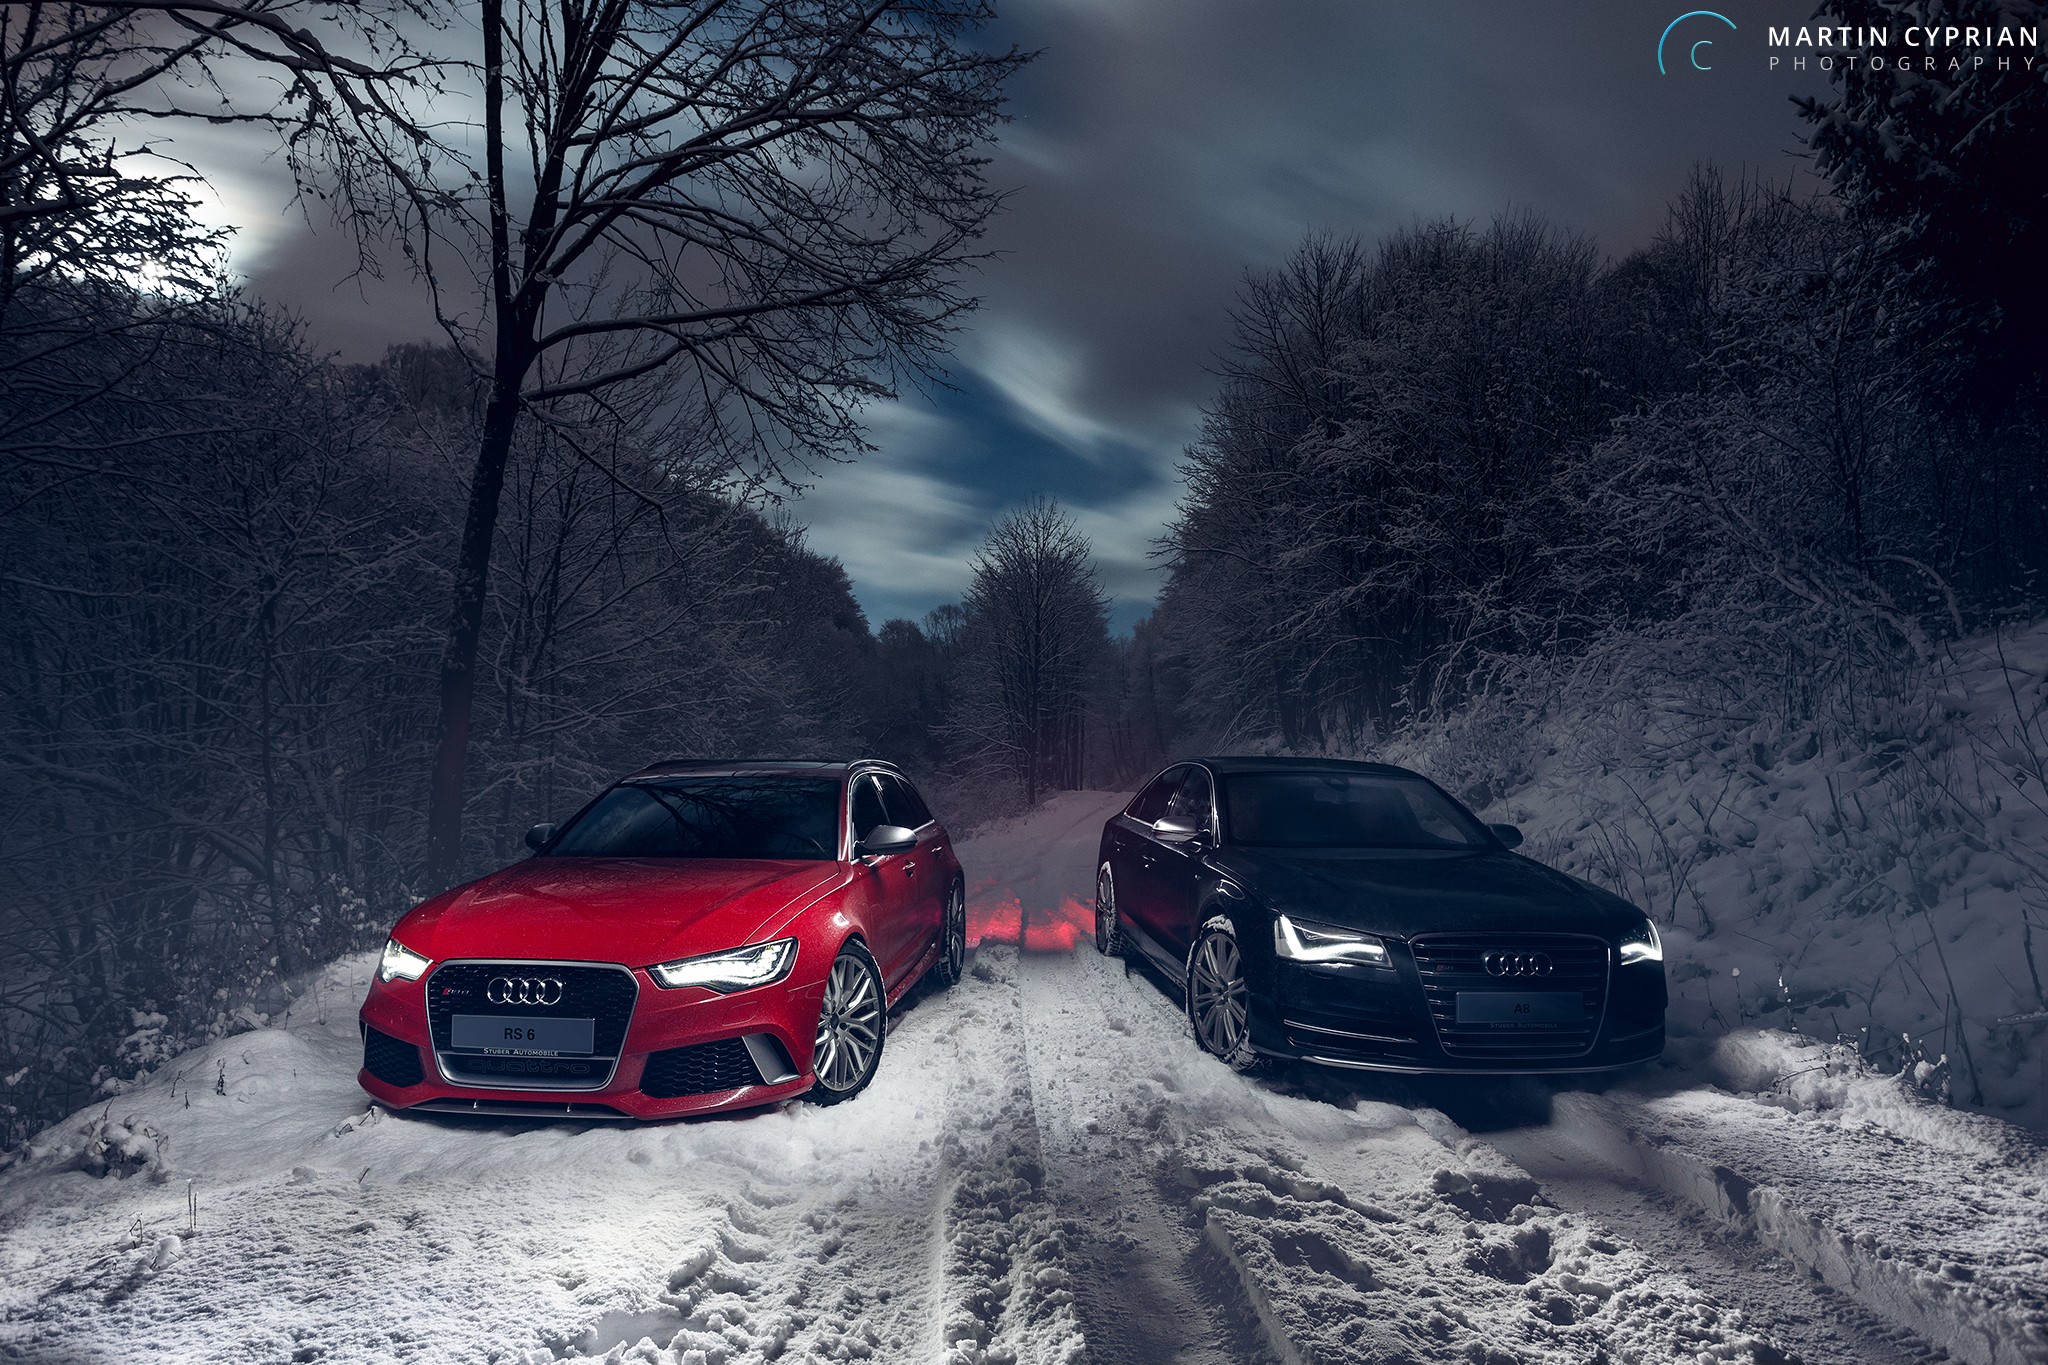 Martin Cyprian, Vehicle, Car, Audi, Audi RS6 Avant, Audi A8, Winter, Snow, Trees, Forest, Long exposure, Clouds, Vehicle front, Lights, Nature, Landscape, Evening Wallpaper